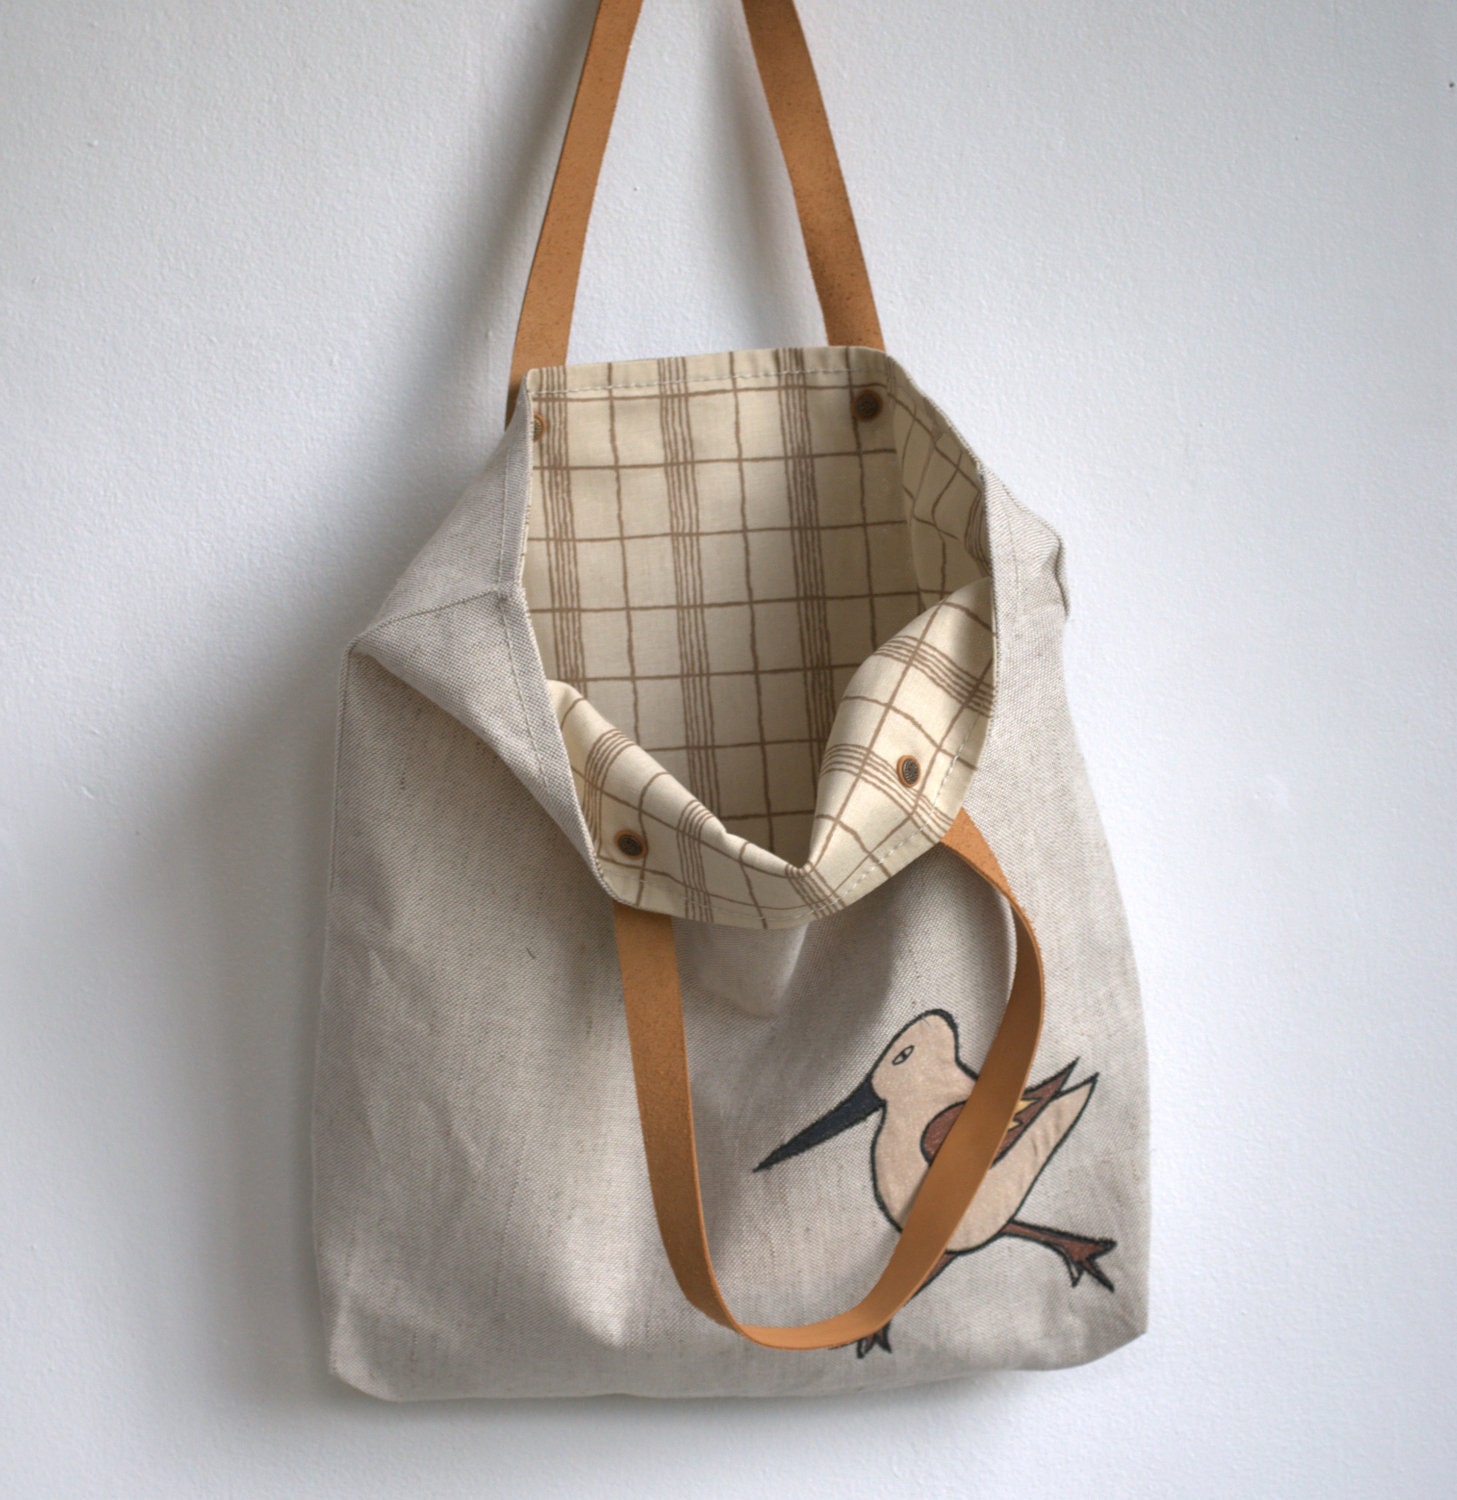 Tote bag book bag everywhere natural linen with leather handles with applique bird 14"x 15" - DonataFelt